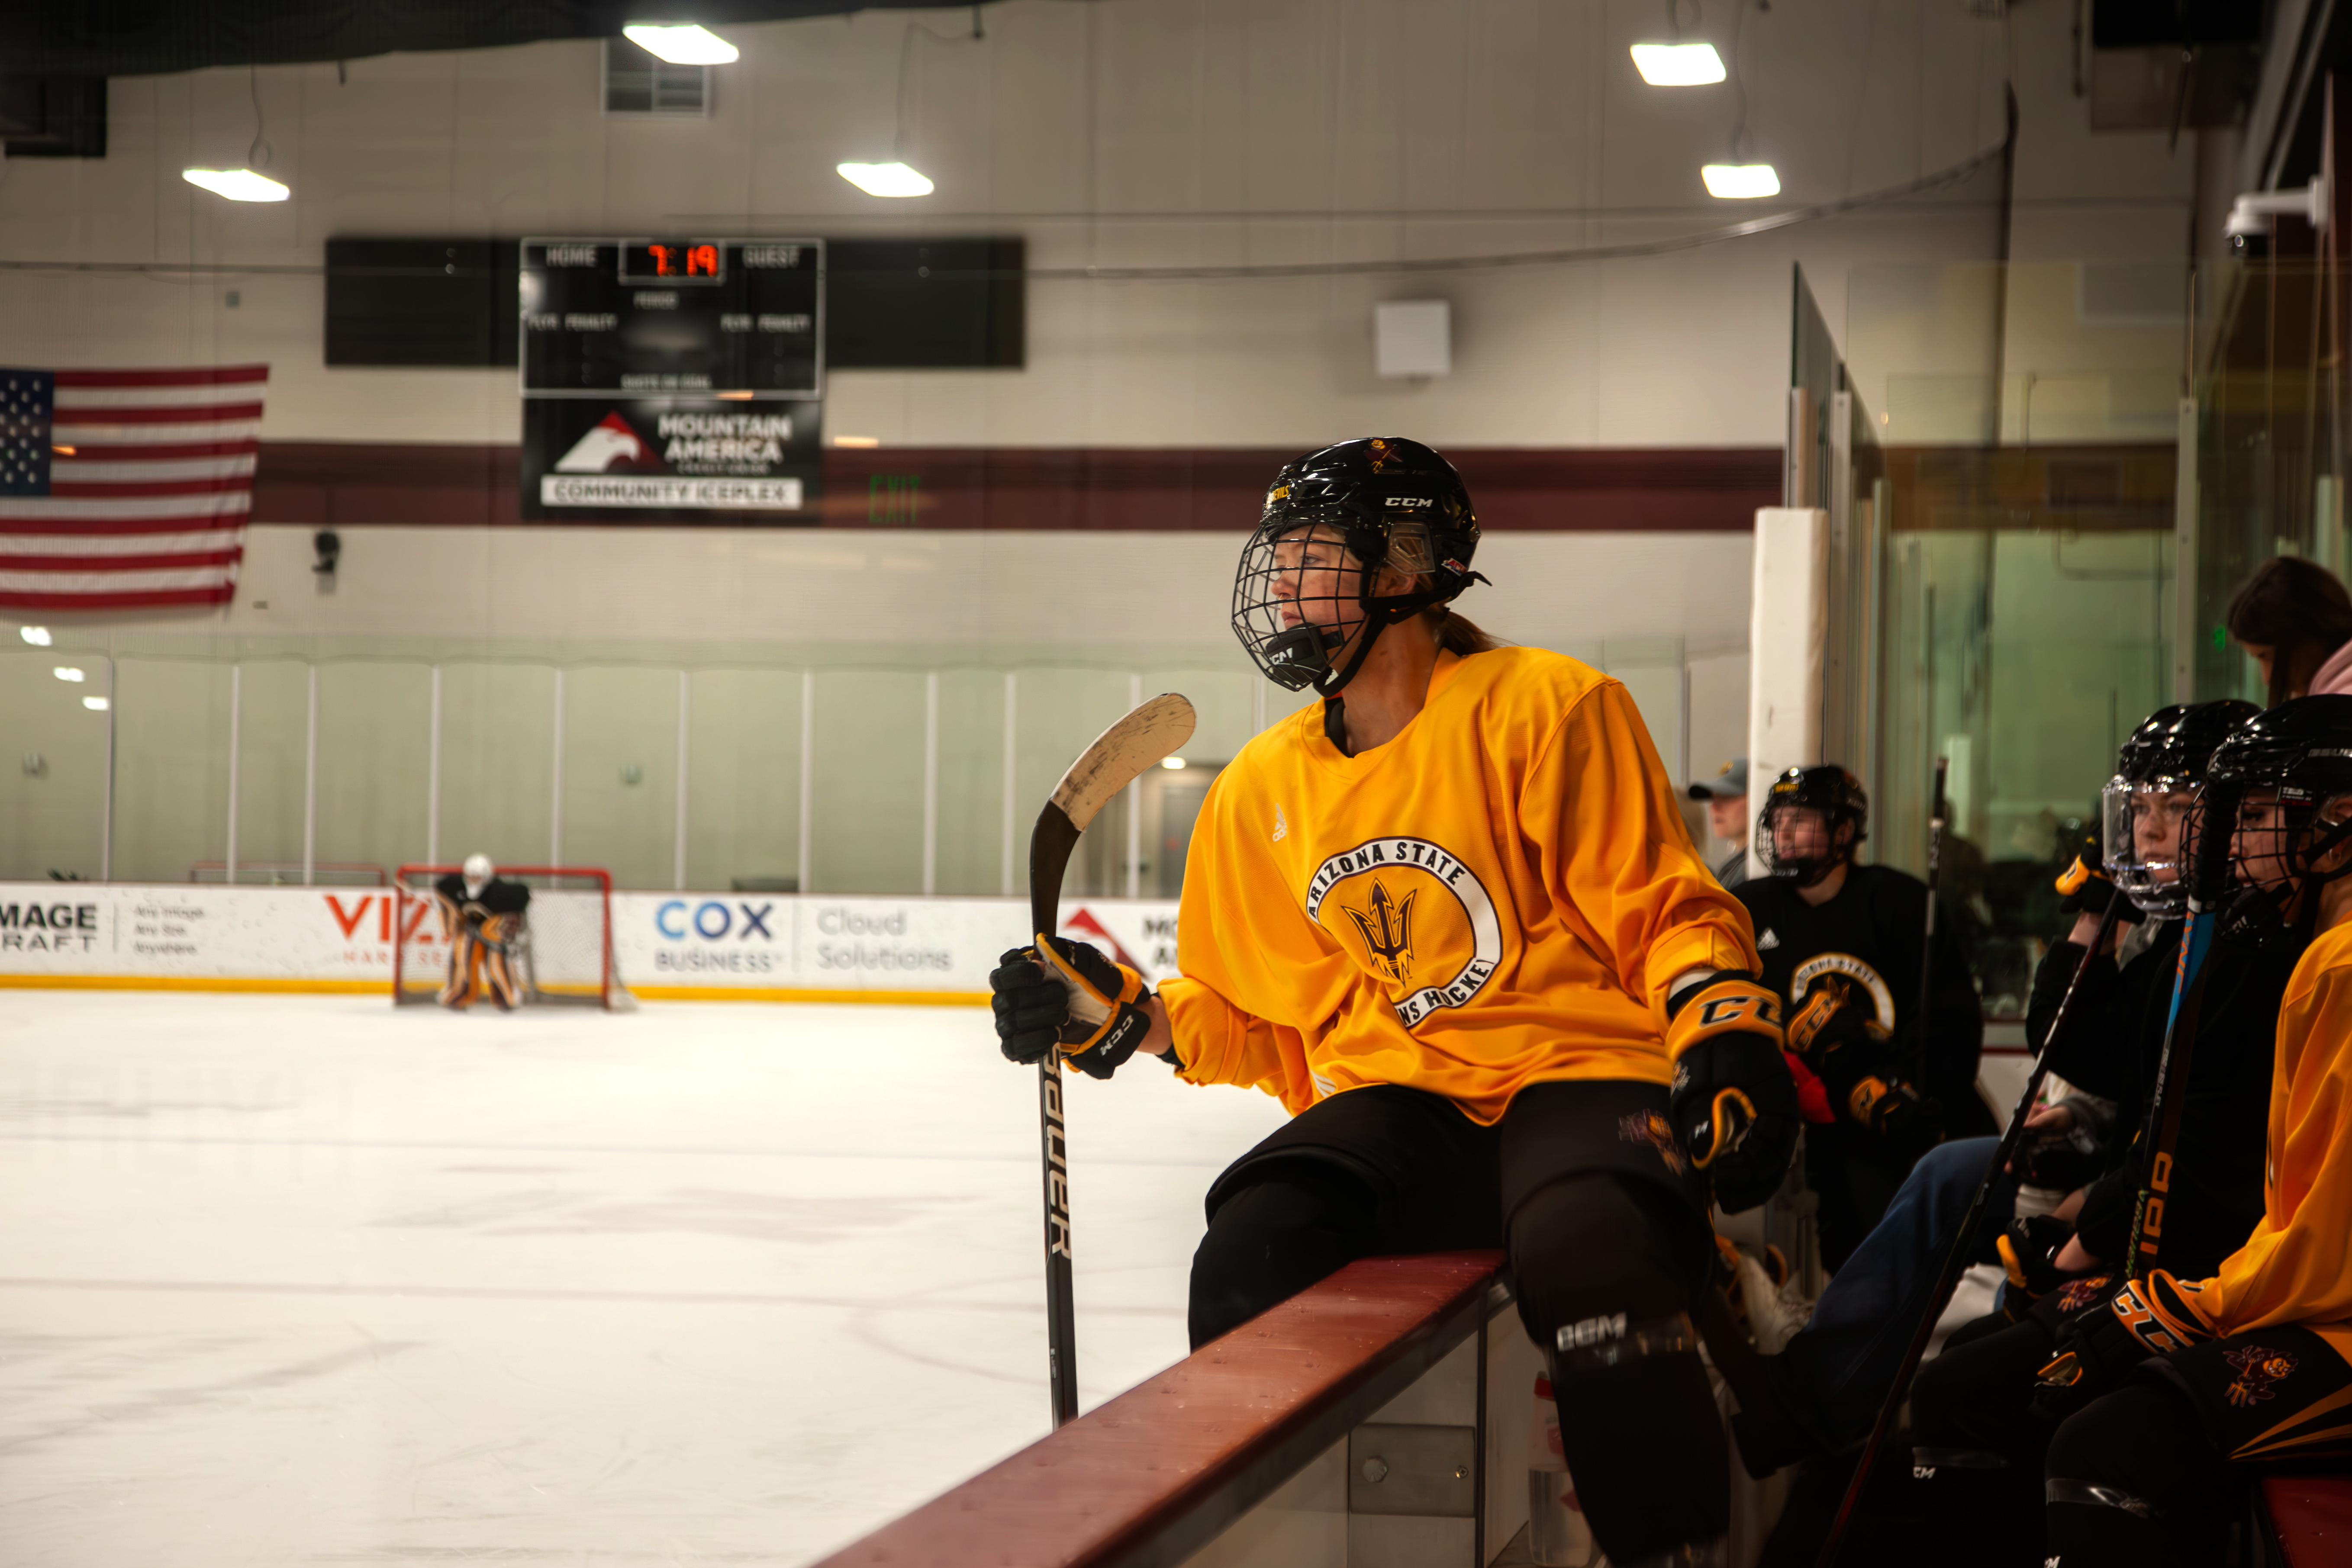 An Arizona State University hockey player is about to get on the ice at the Mountain America Community Iceplex on Wed., Feb. 21, 2024 in Tempe, AZ.